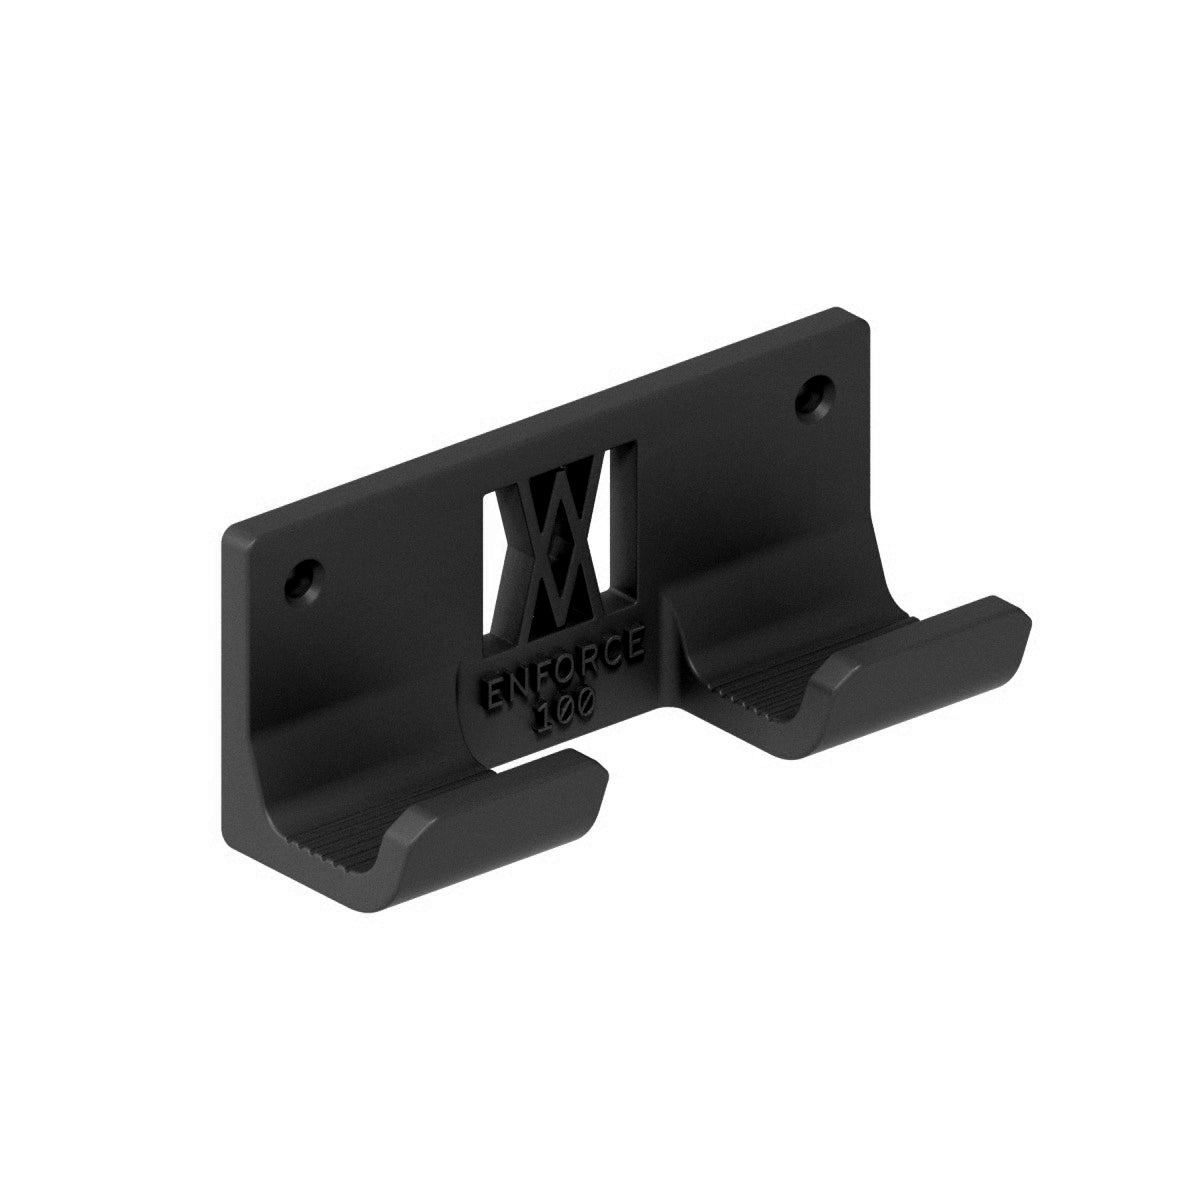 Wall Mount for Engineers Hammer Holder 100g I WM027